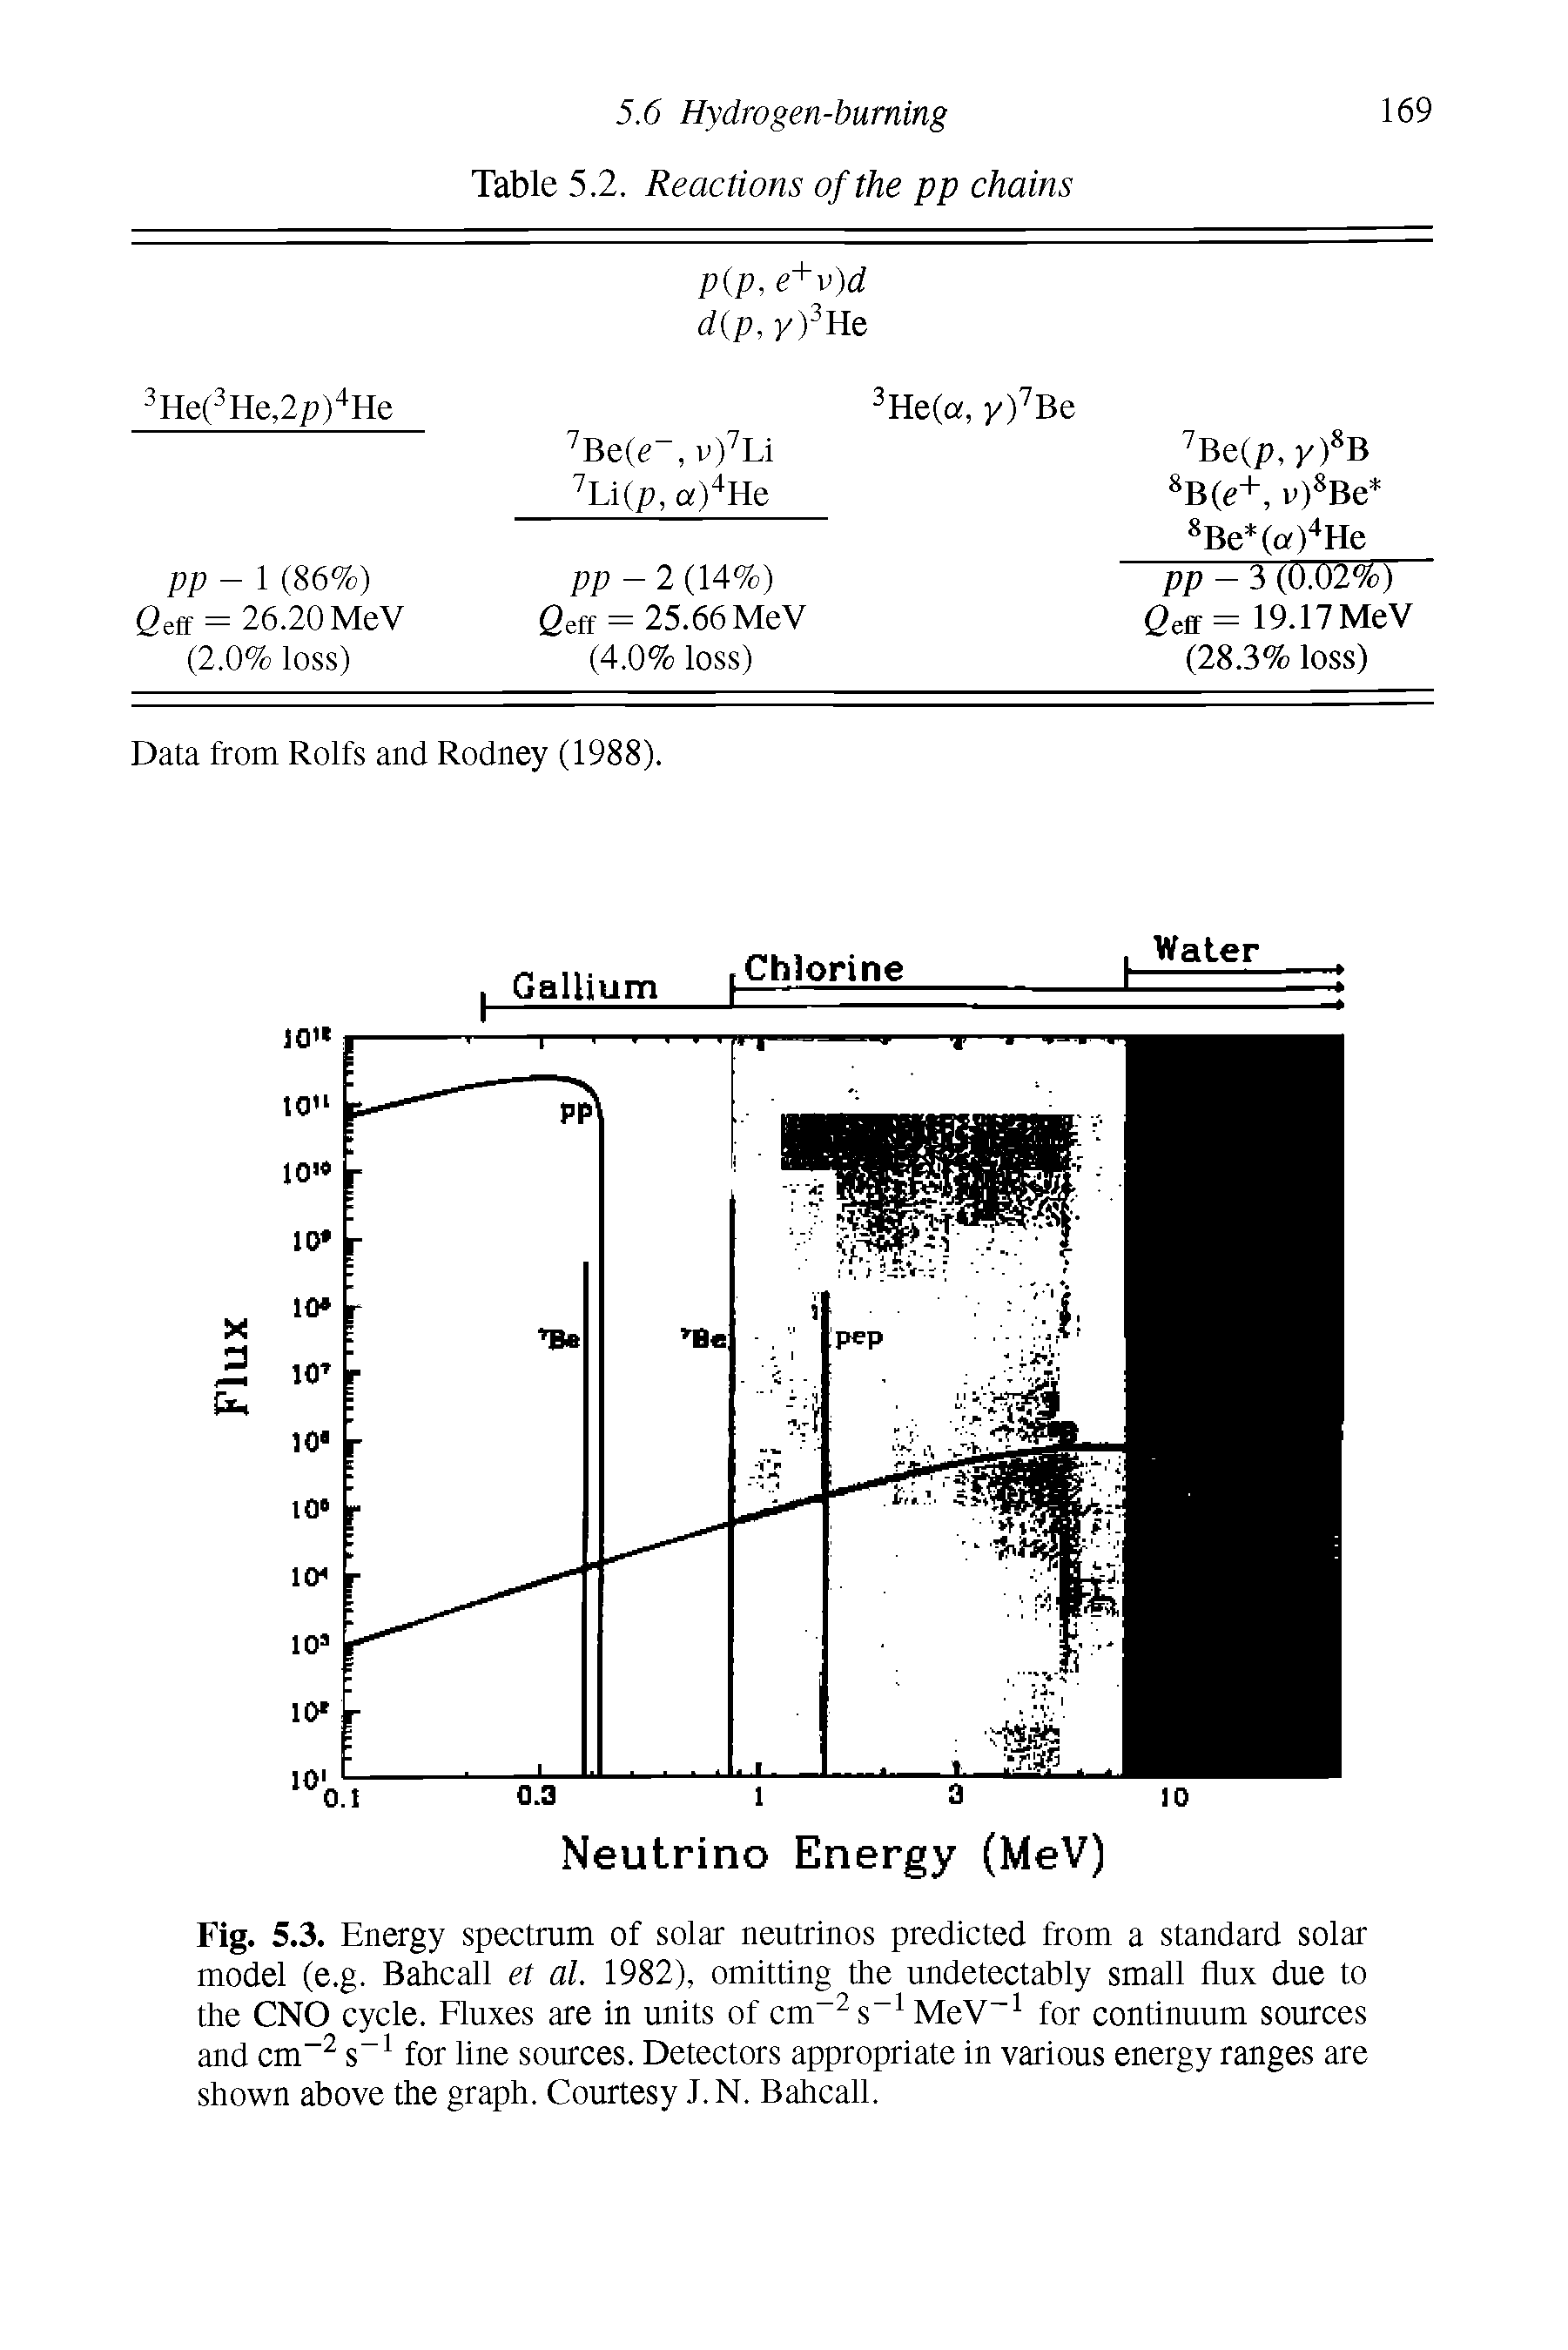 Fig. 5.3. Energy spectrum of solar neutrinos predicted from a standard solar model (e.g. Bahcall et al. 1982), omitting the undetectably small flux due to the CNO cycle. Fluxes are in units of cm-2 s-1 MeV-1 for continuum sources and cm-2 s-1 for line sources. Detectors appropriate in various energy ranges are shown above the graph. Courtesy J.N. Bahcall.